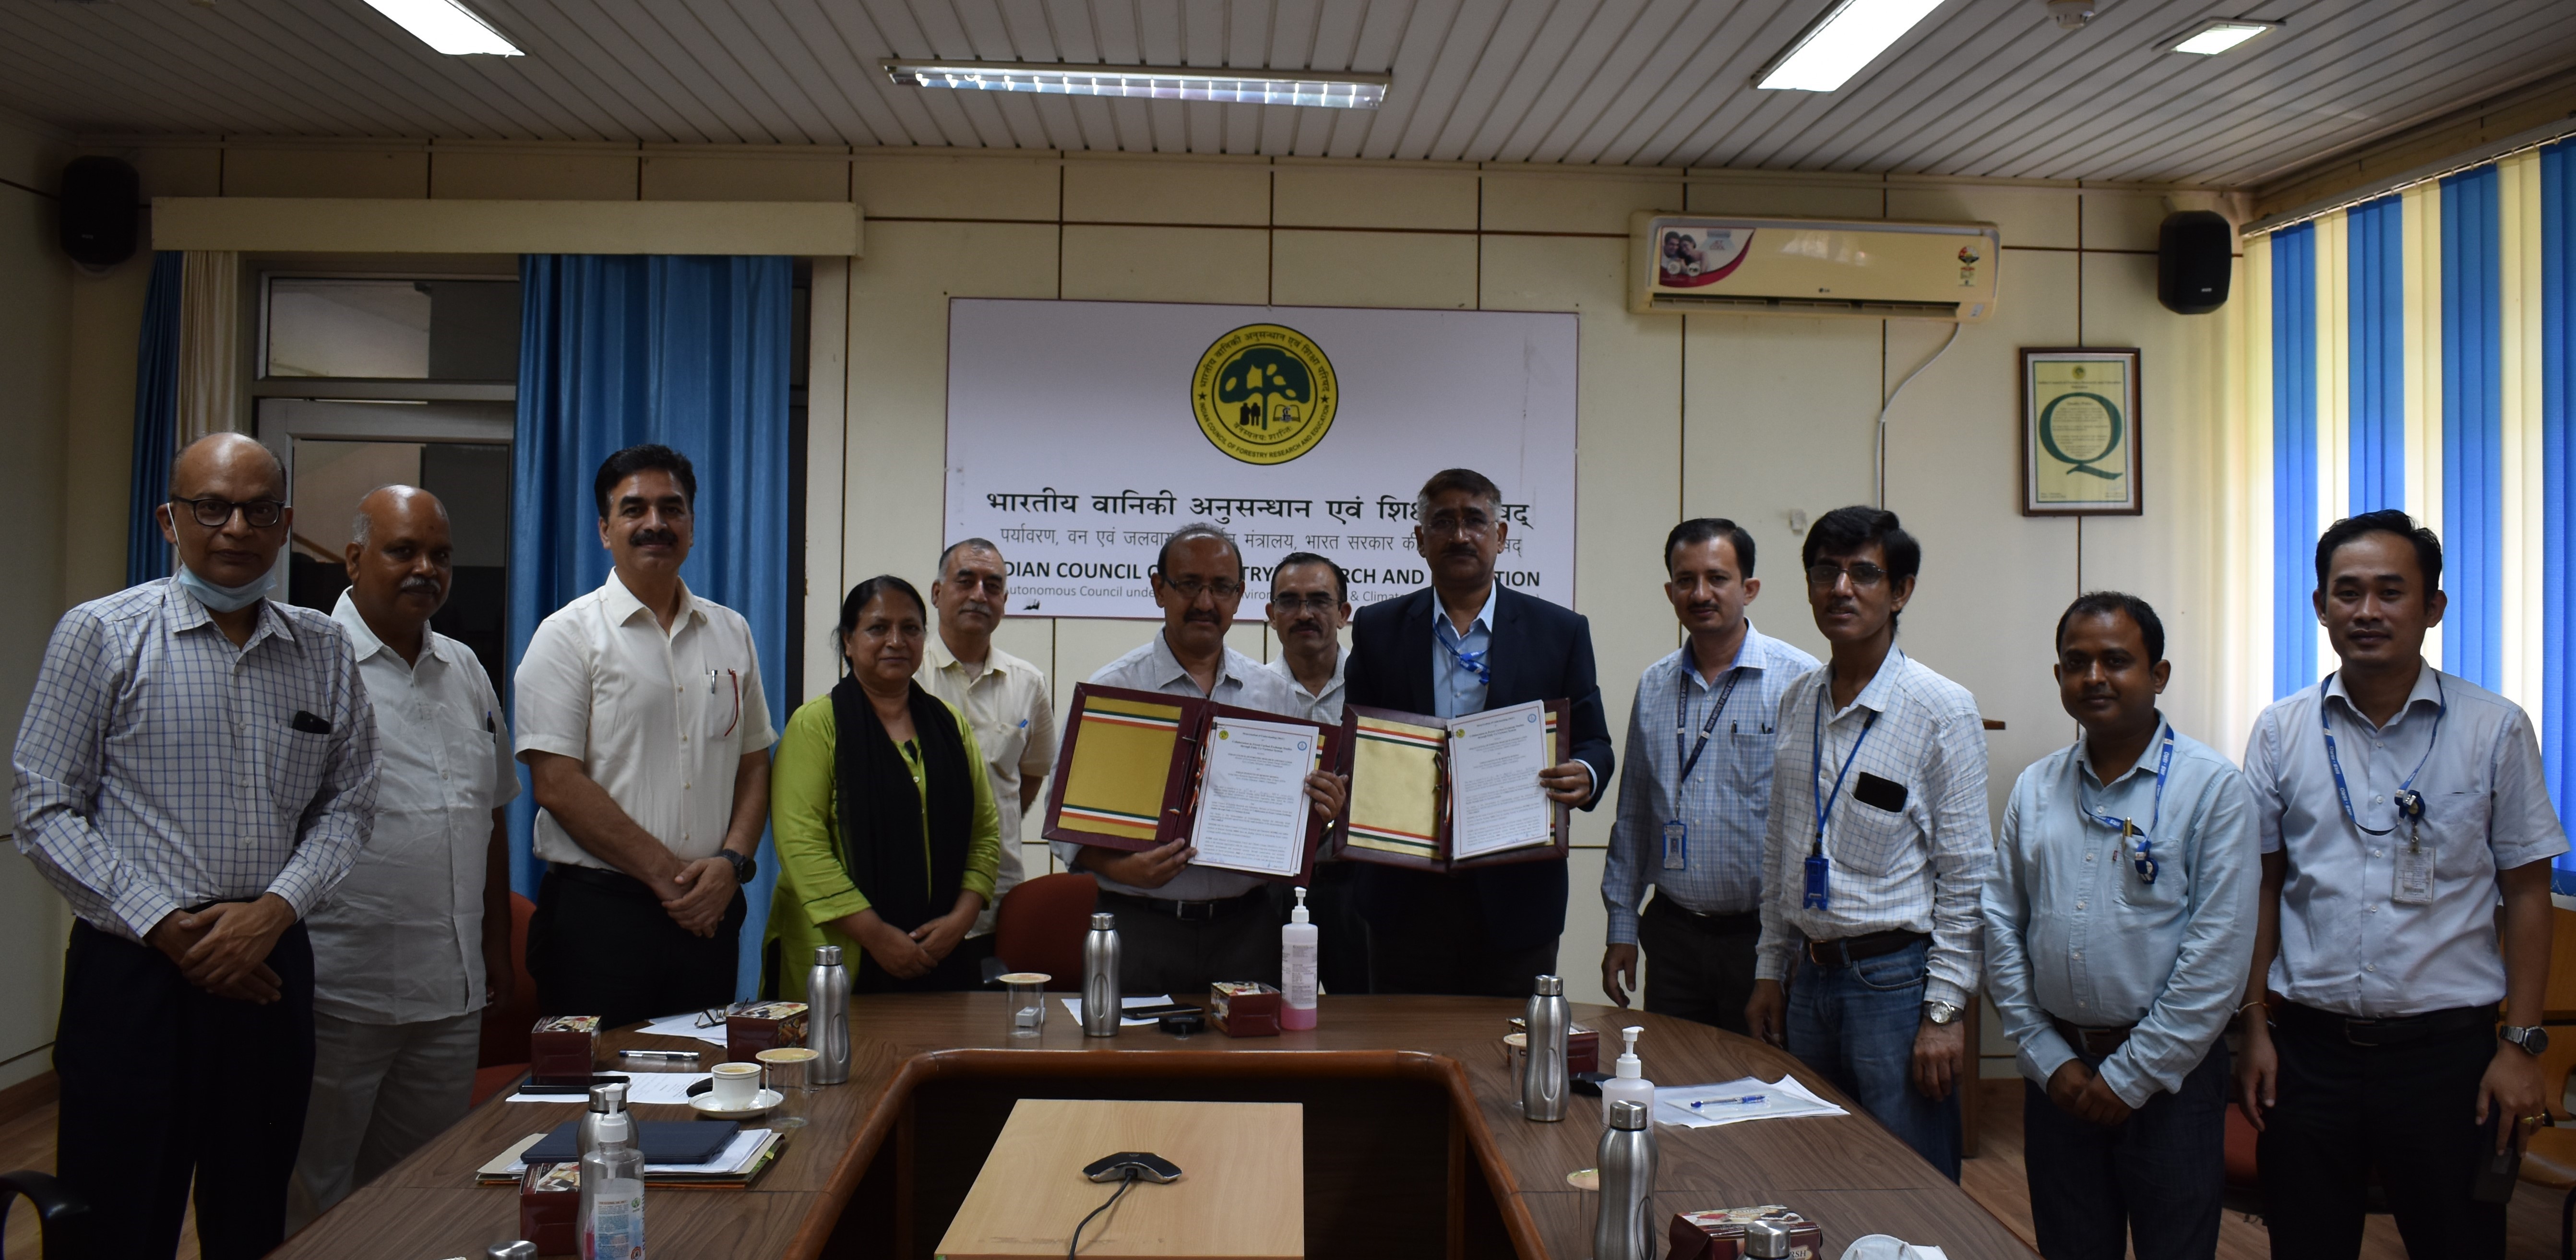 MoU signed between Indian Institute of Remote Sensing (IIRS) and Indian Council of Forestry Research and Education (ICFRE) on 12 August 2022 for collaboration in Forest Carbon Exchange Studies through Eddy Covariance System 